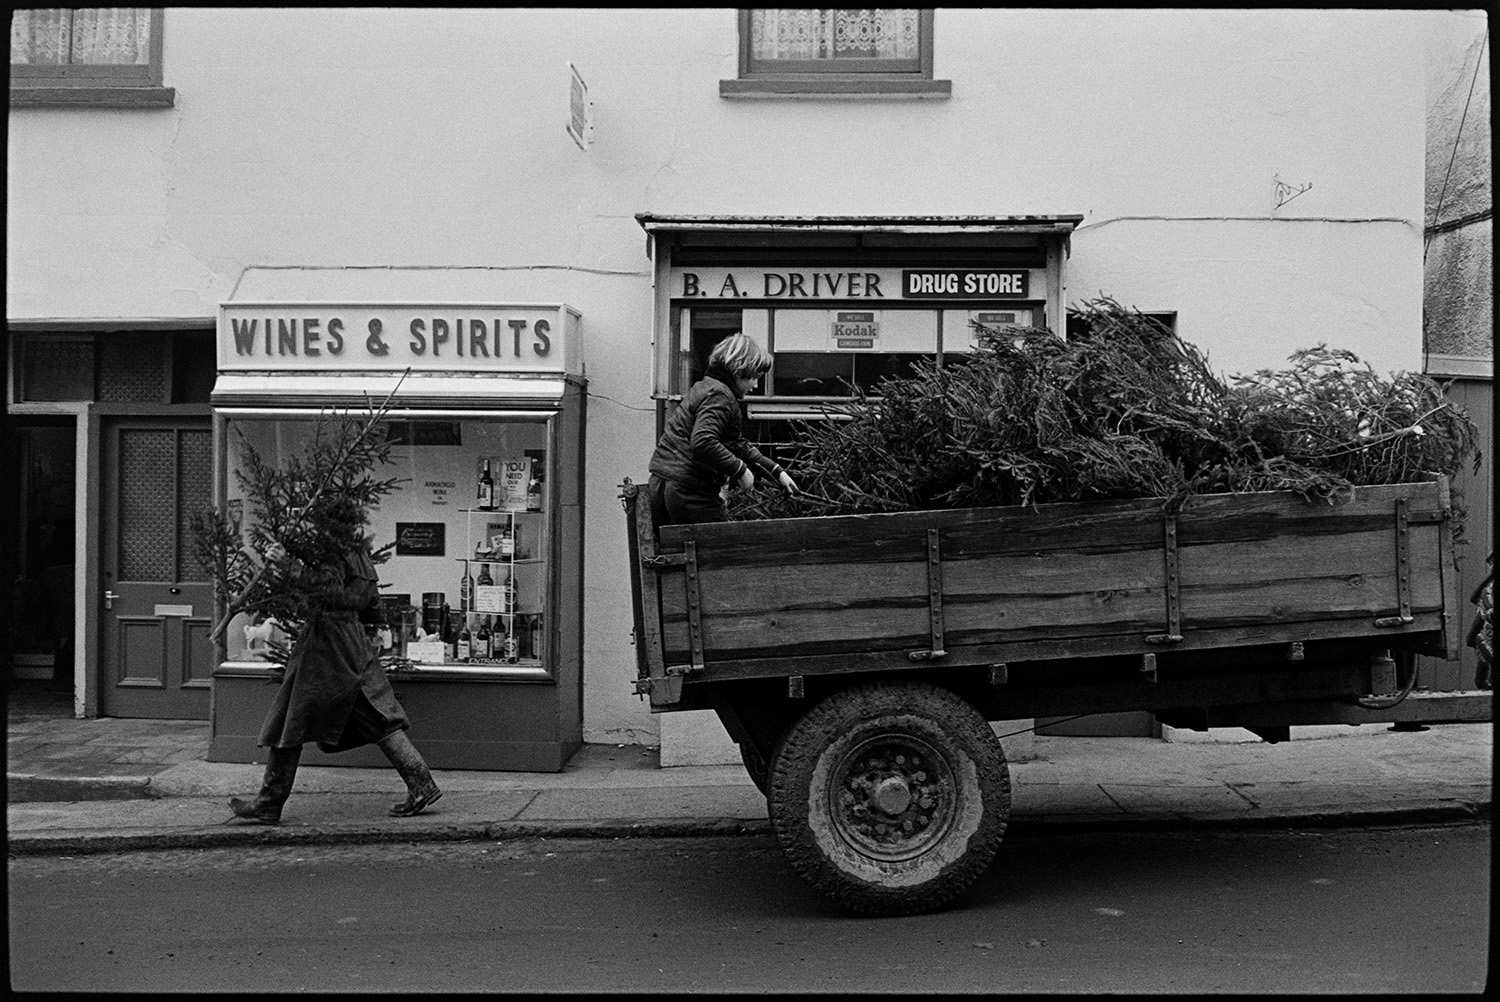 Delivering Christmas trees to shop. 
[Two people delivering Christmas trees to shops in Hatherleigh. They are unloading the trees from a trailer parked outside the shops fronts of Wines & Spirits and B A Driver, Drug Store.]